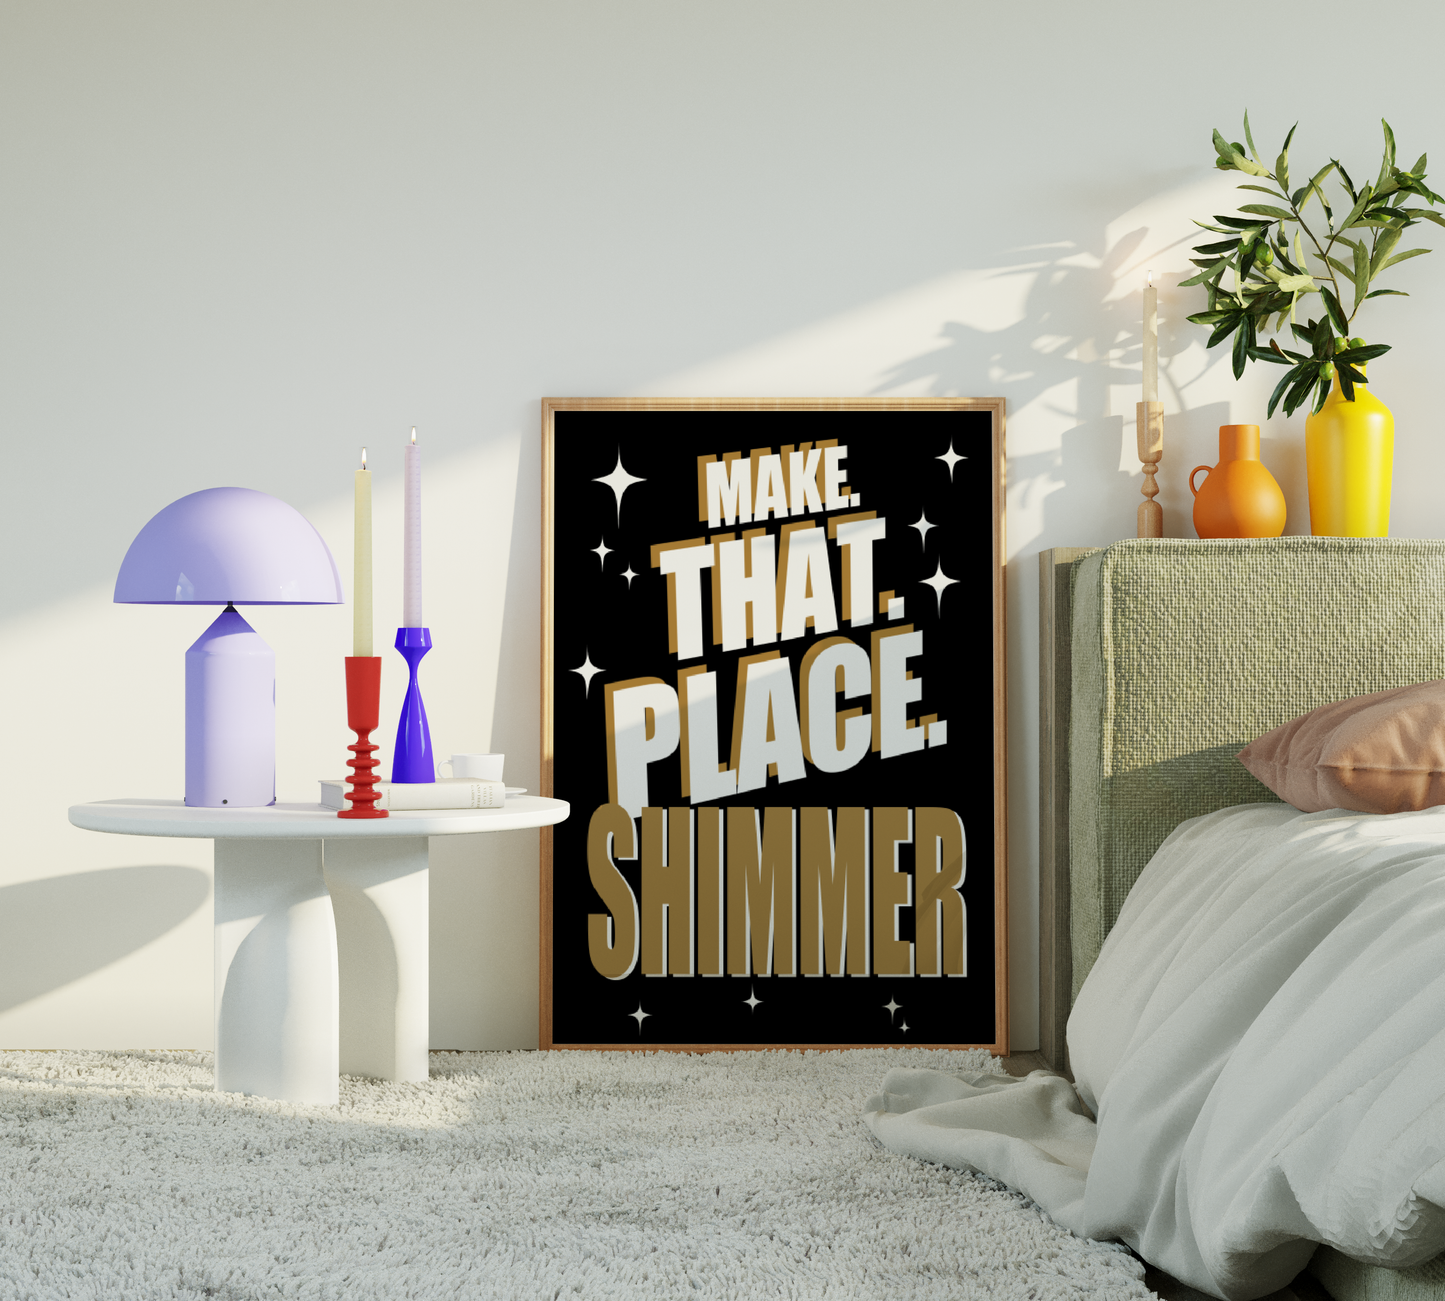 'Make That Place Shimmer' Print